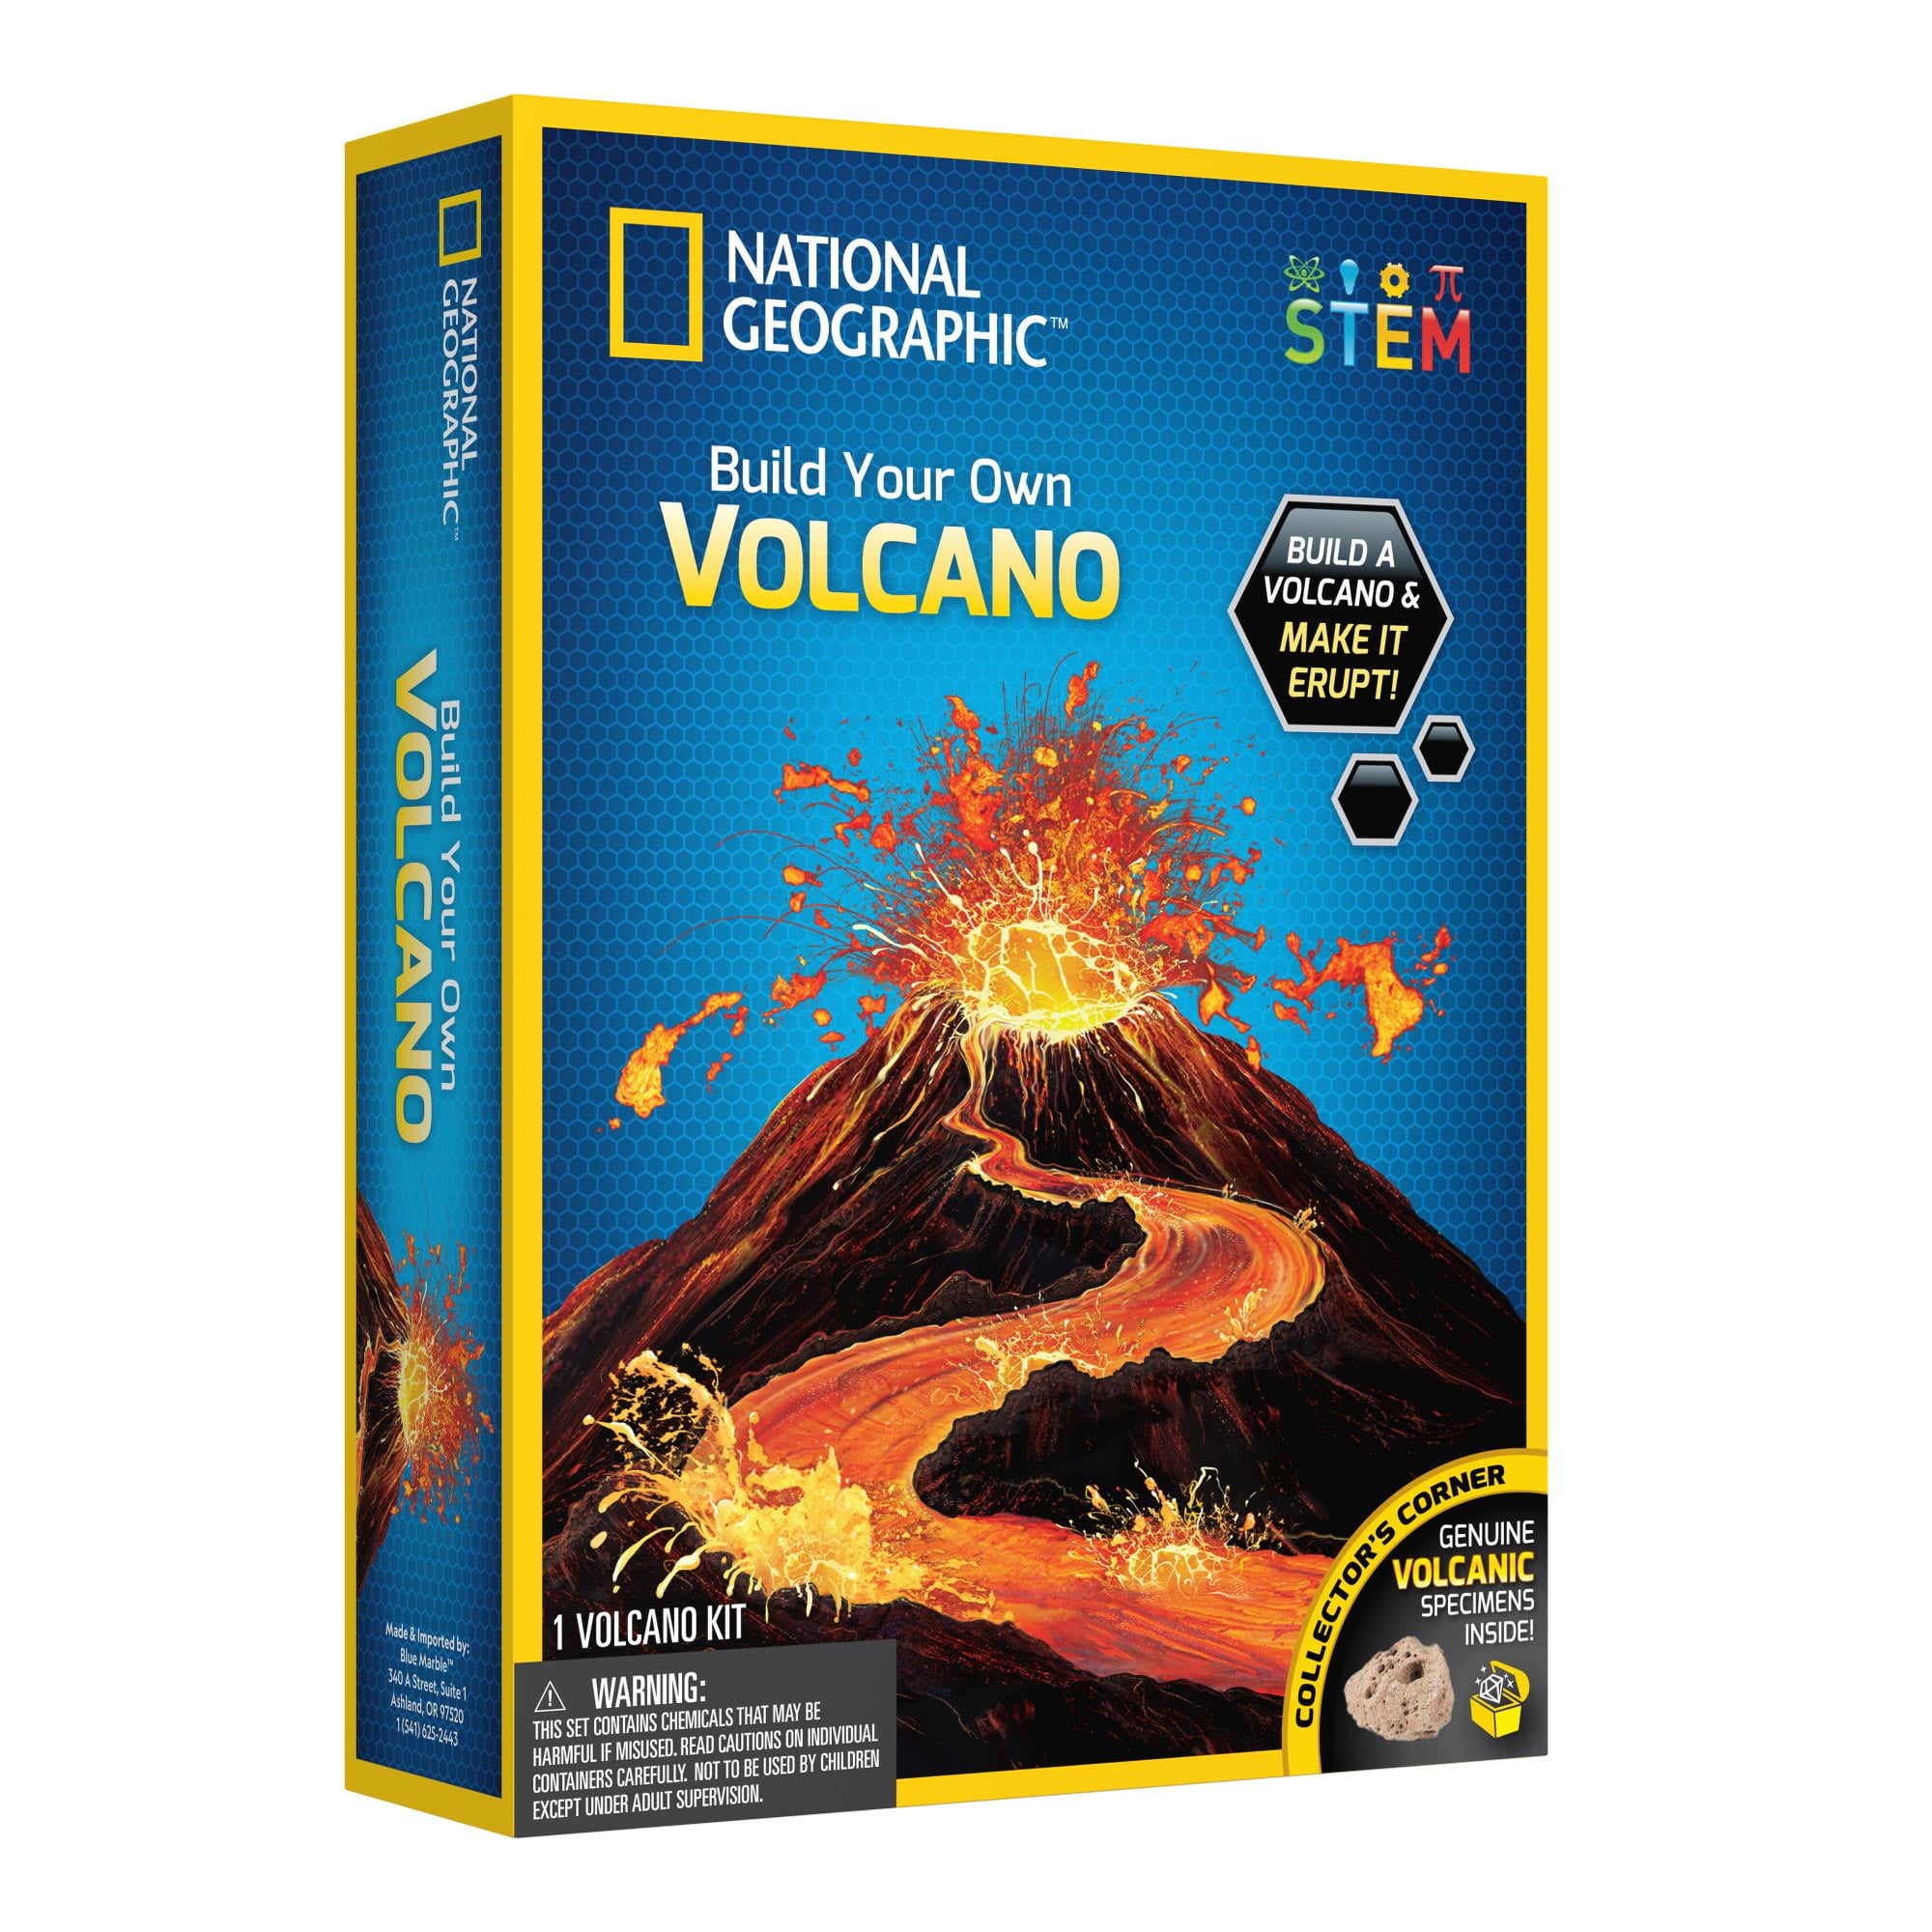 NEW DOUBLE VOLCANO ERUPTION PLAY KIT EDUCATIONAL SCHOOL HOME SCIENCE PLAYSET 